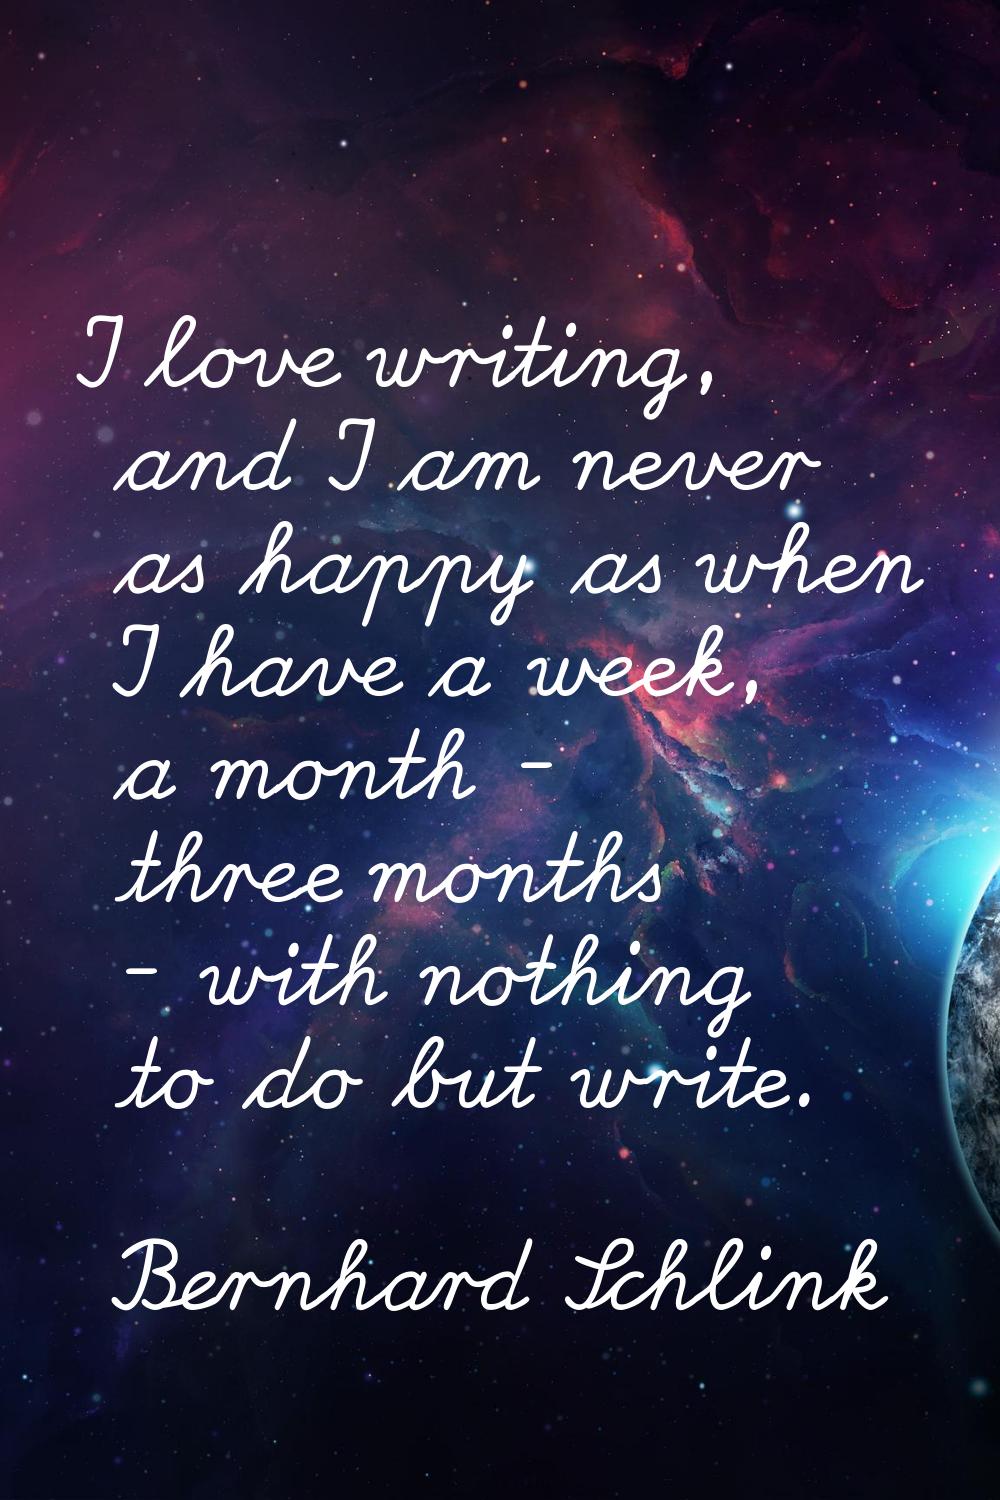 I love writing, and I am never as happy as when I have a week, a month - three months - with nothin